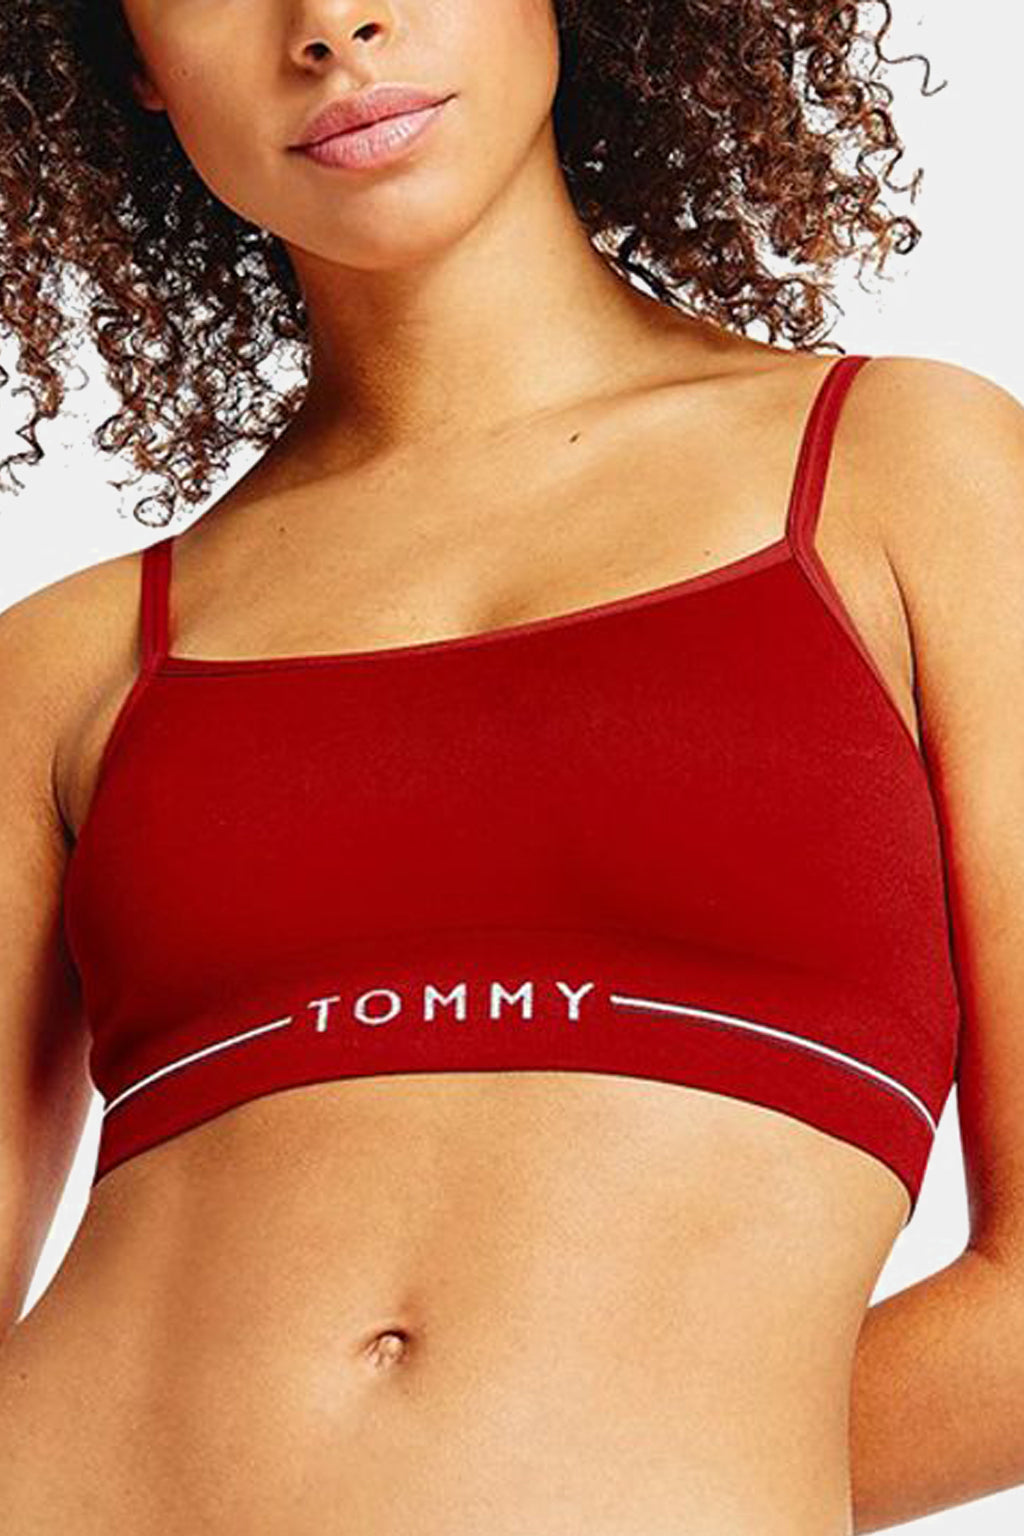 Tommy Hilfiger - Bra Non-Wired Seamless Push-Up